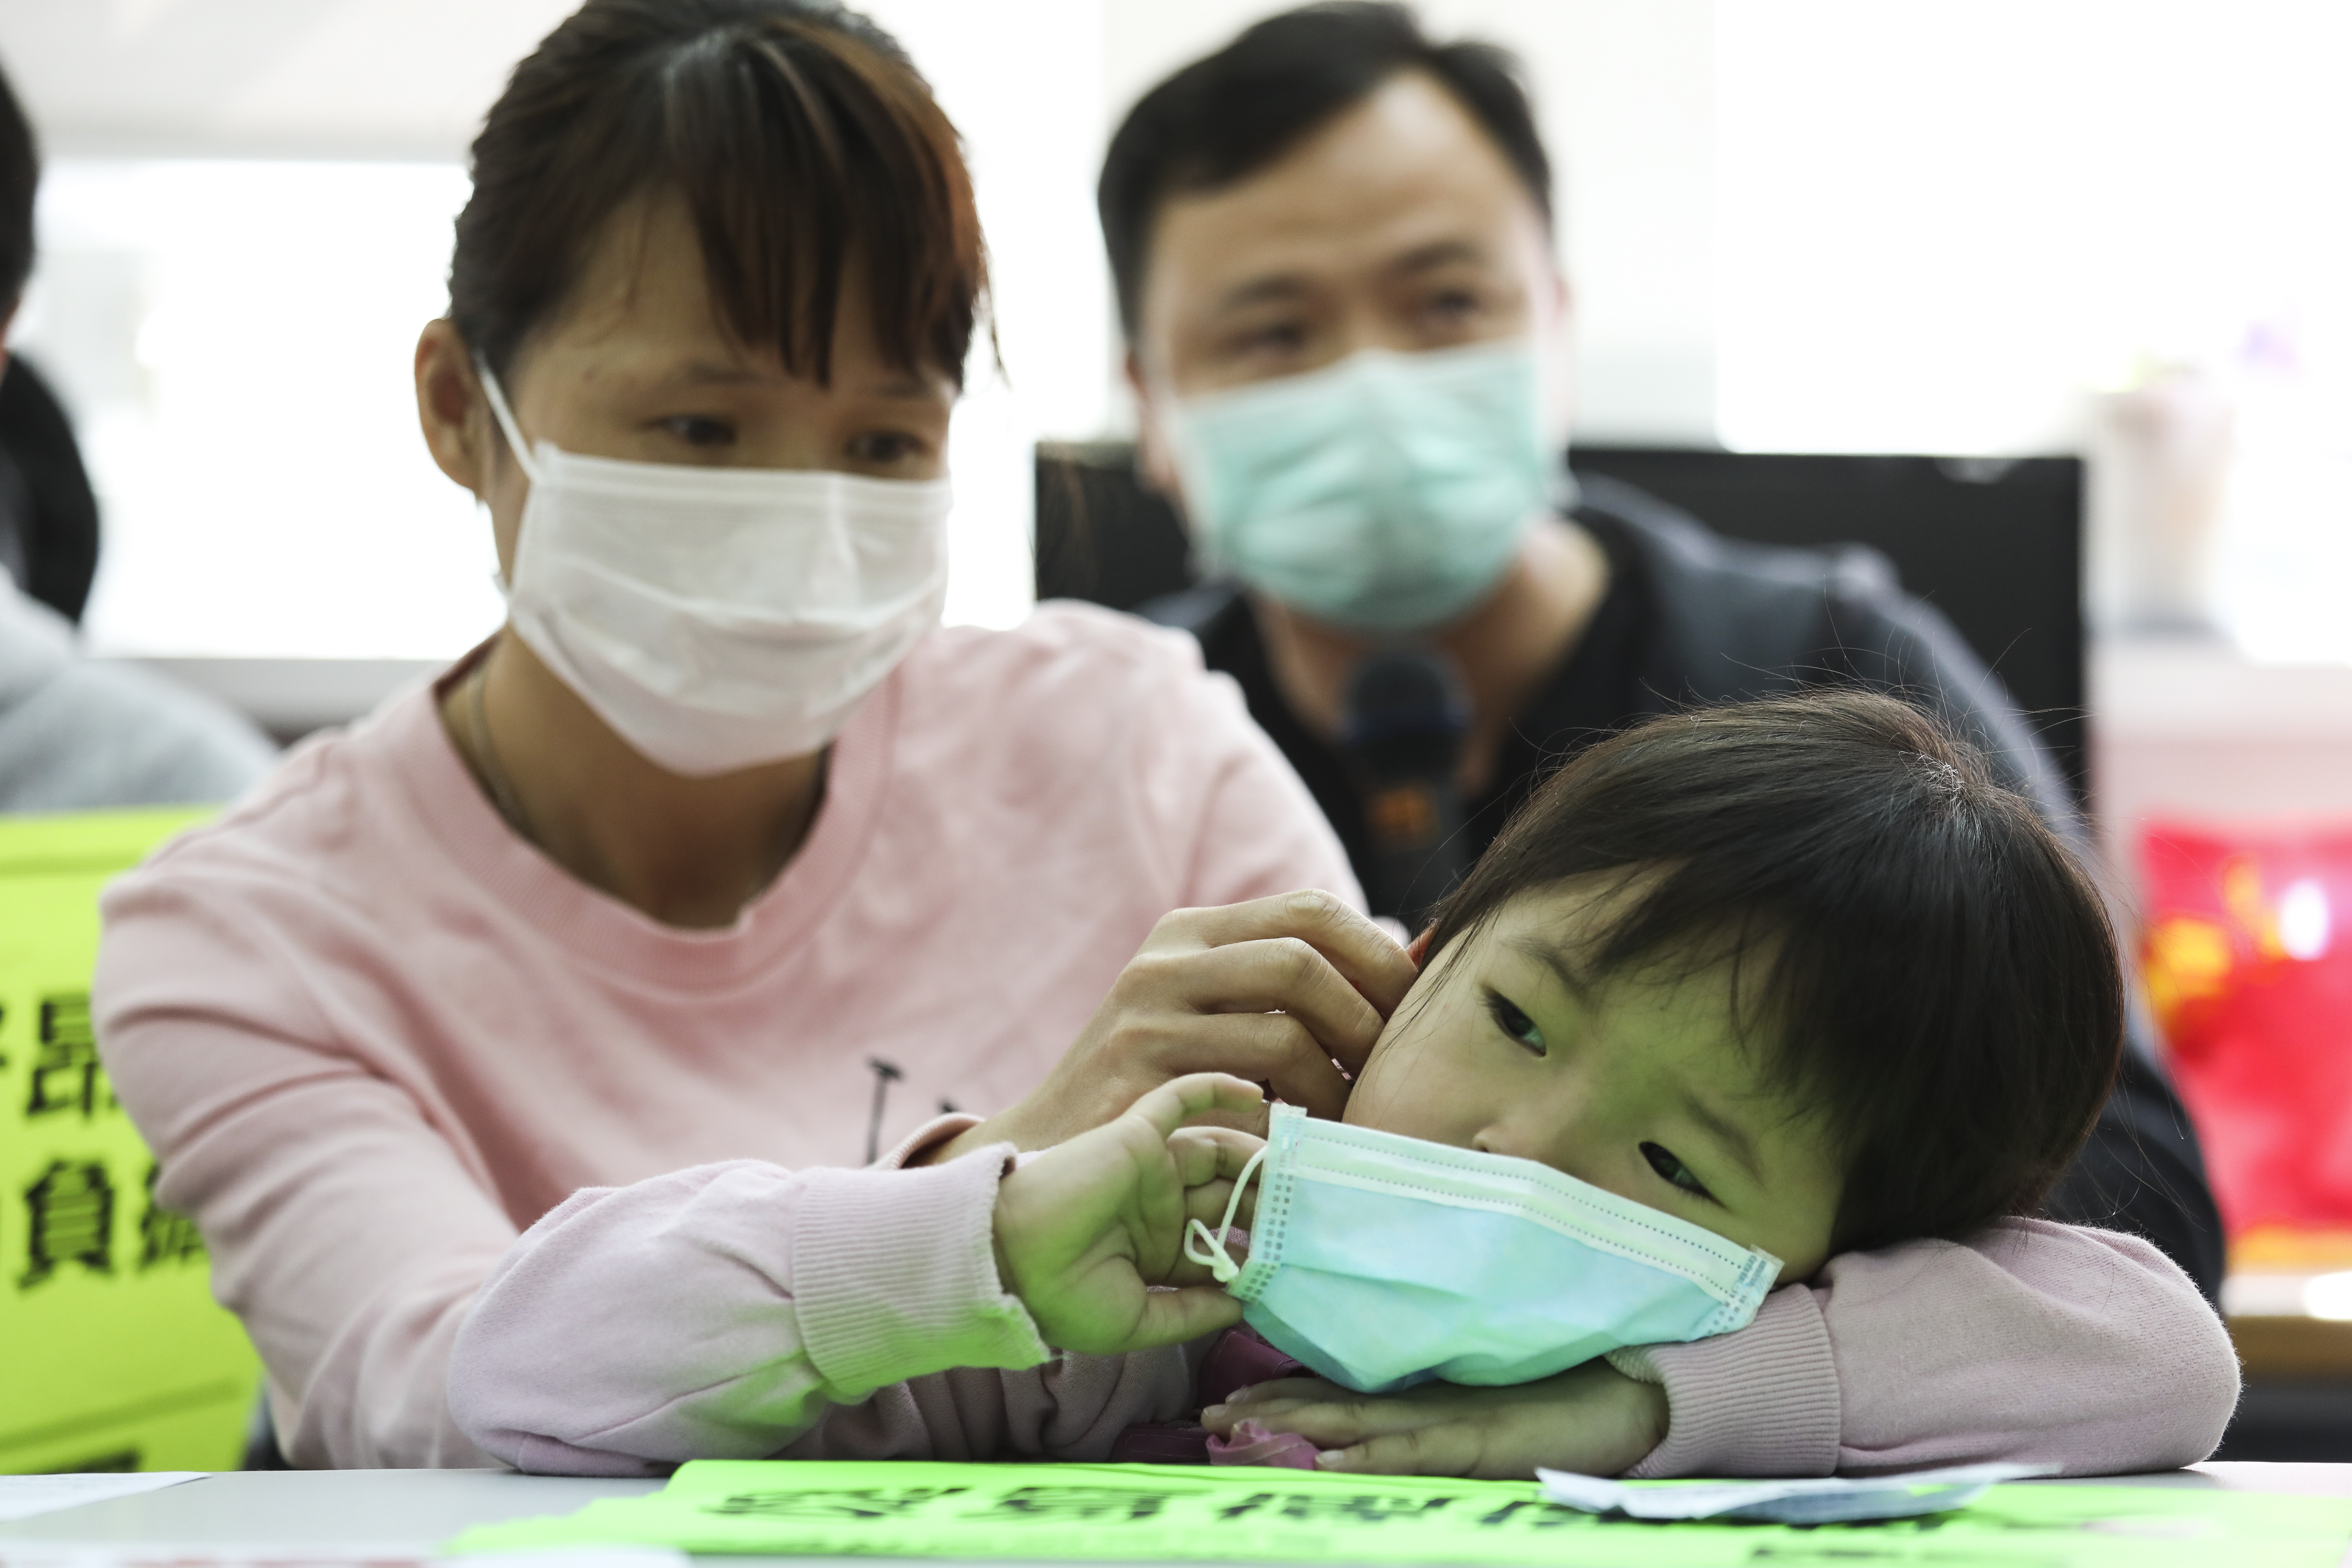 Four-year-old Huang Zijuan and her mother Wen Qifei (left) share the difficulties they have faced amid the coronavirus epidemic during a press conference organised by Society for Community Organisation in Sham Shui Po on February 23. Photo: Nora Tam